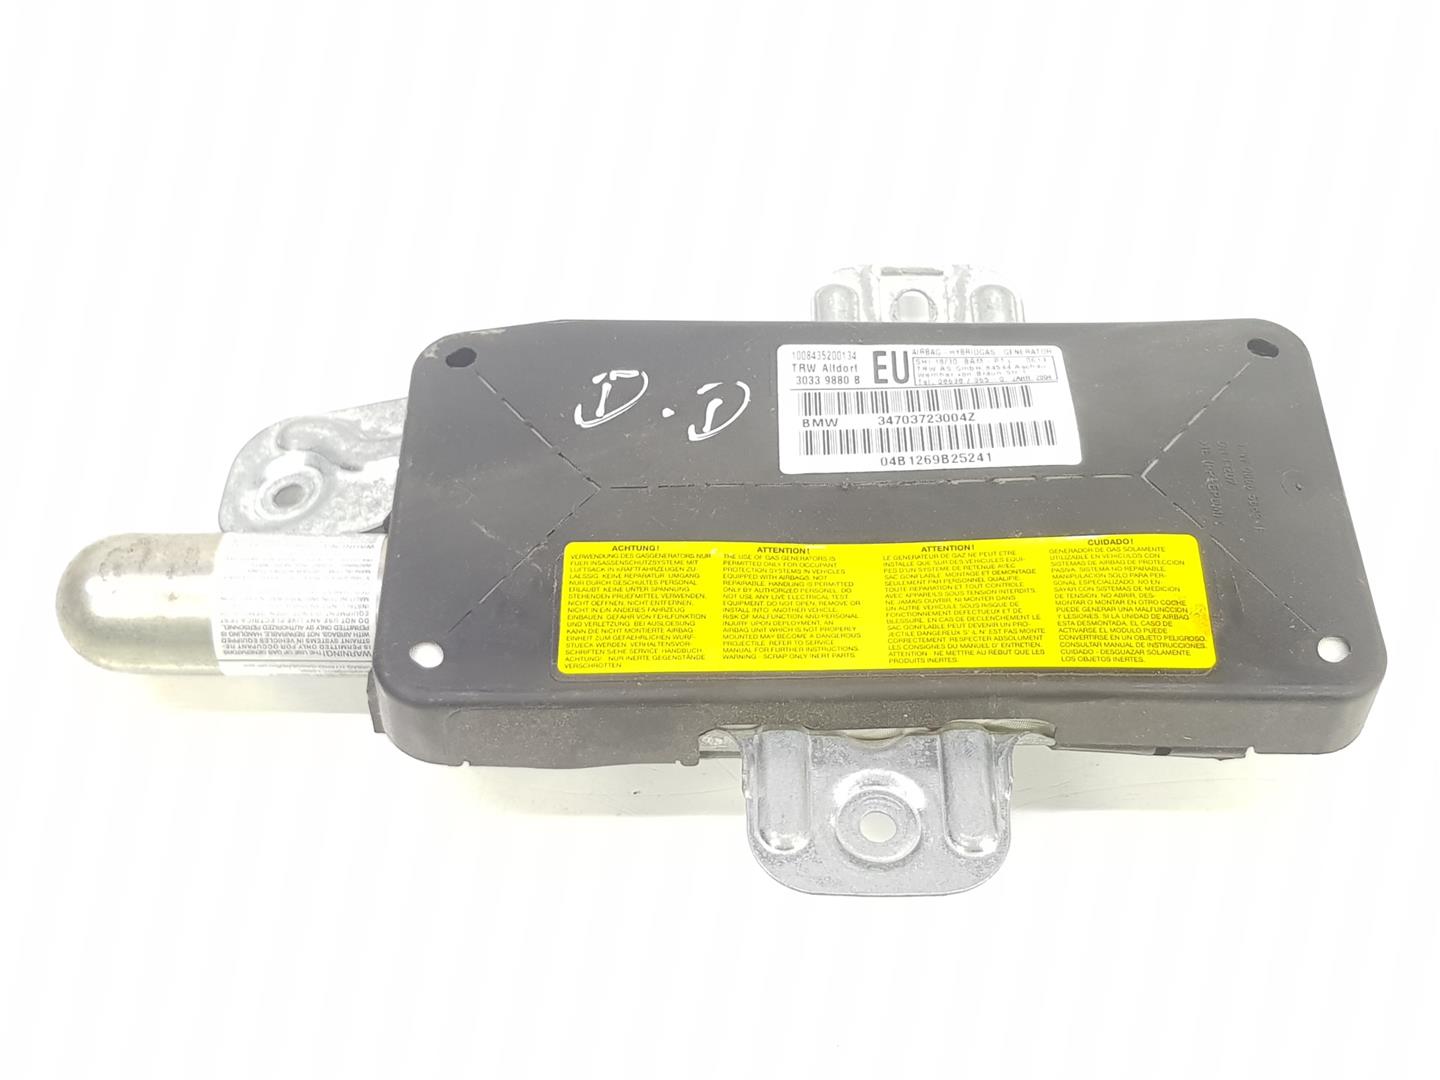 BMW 3 Series E46 (1997-2006) Front Right Door Airbag SRS 34703723004, 3723004 19798334